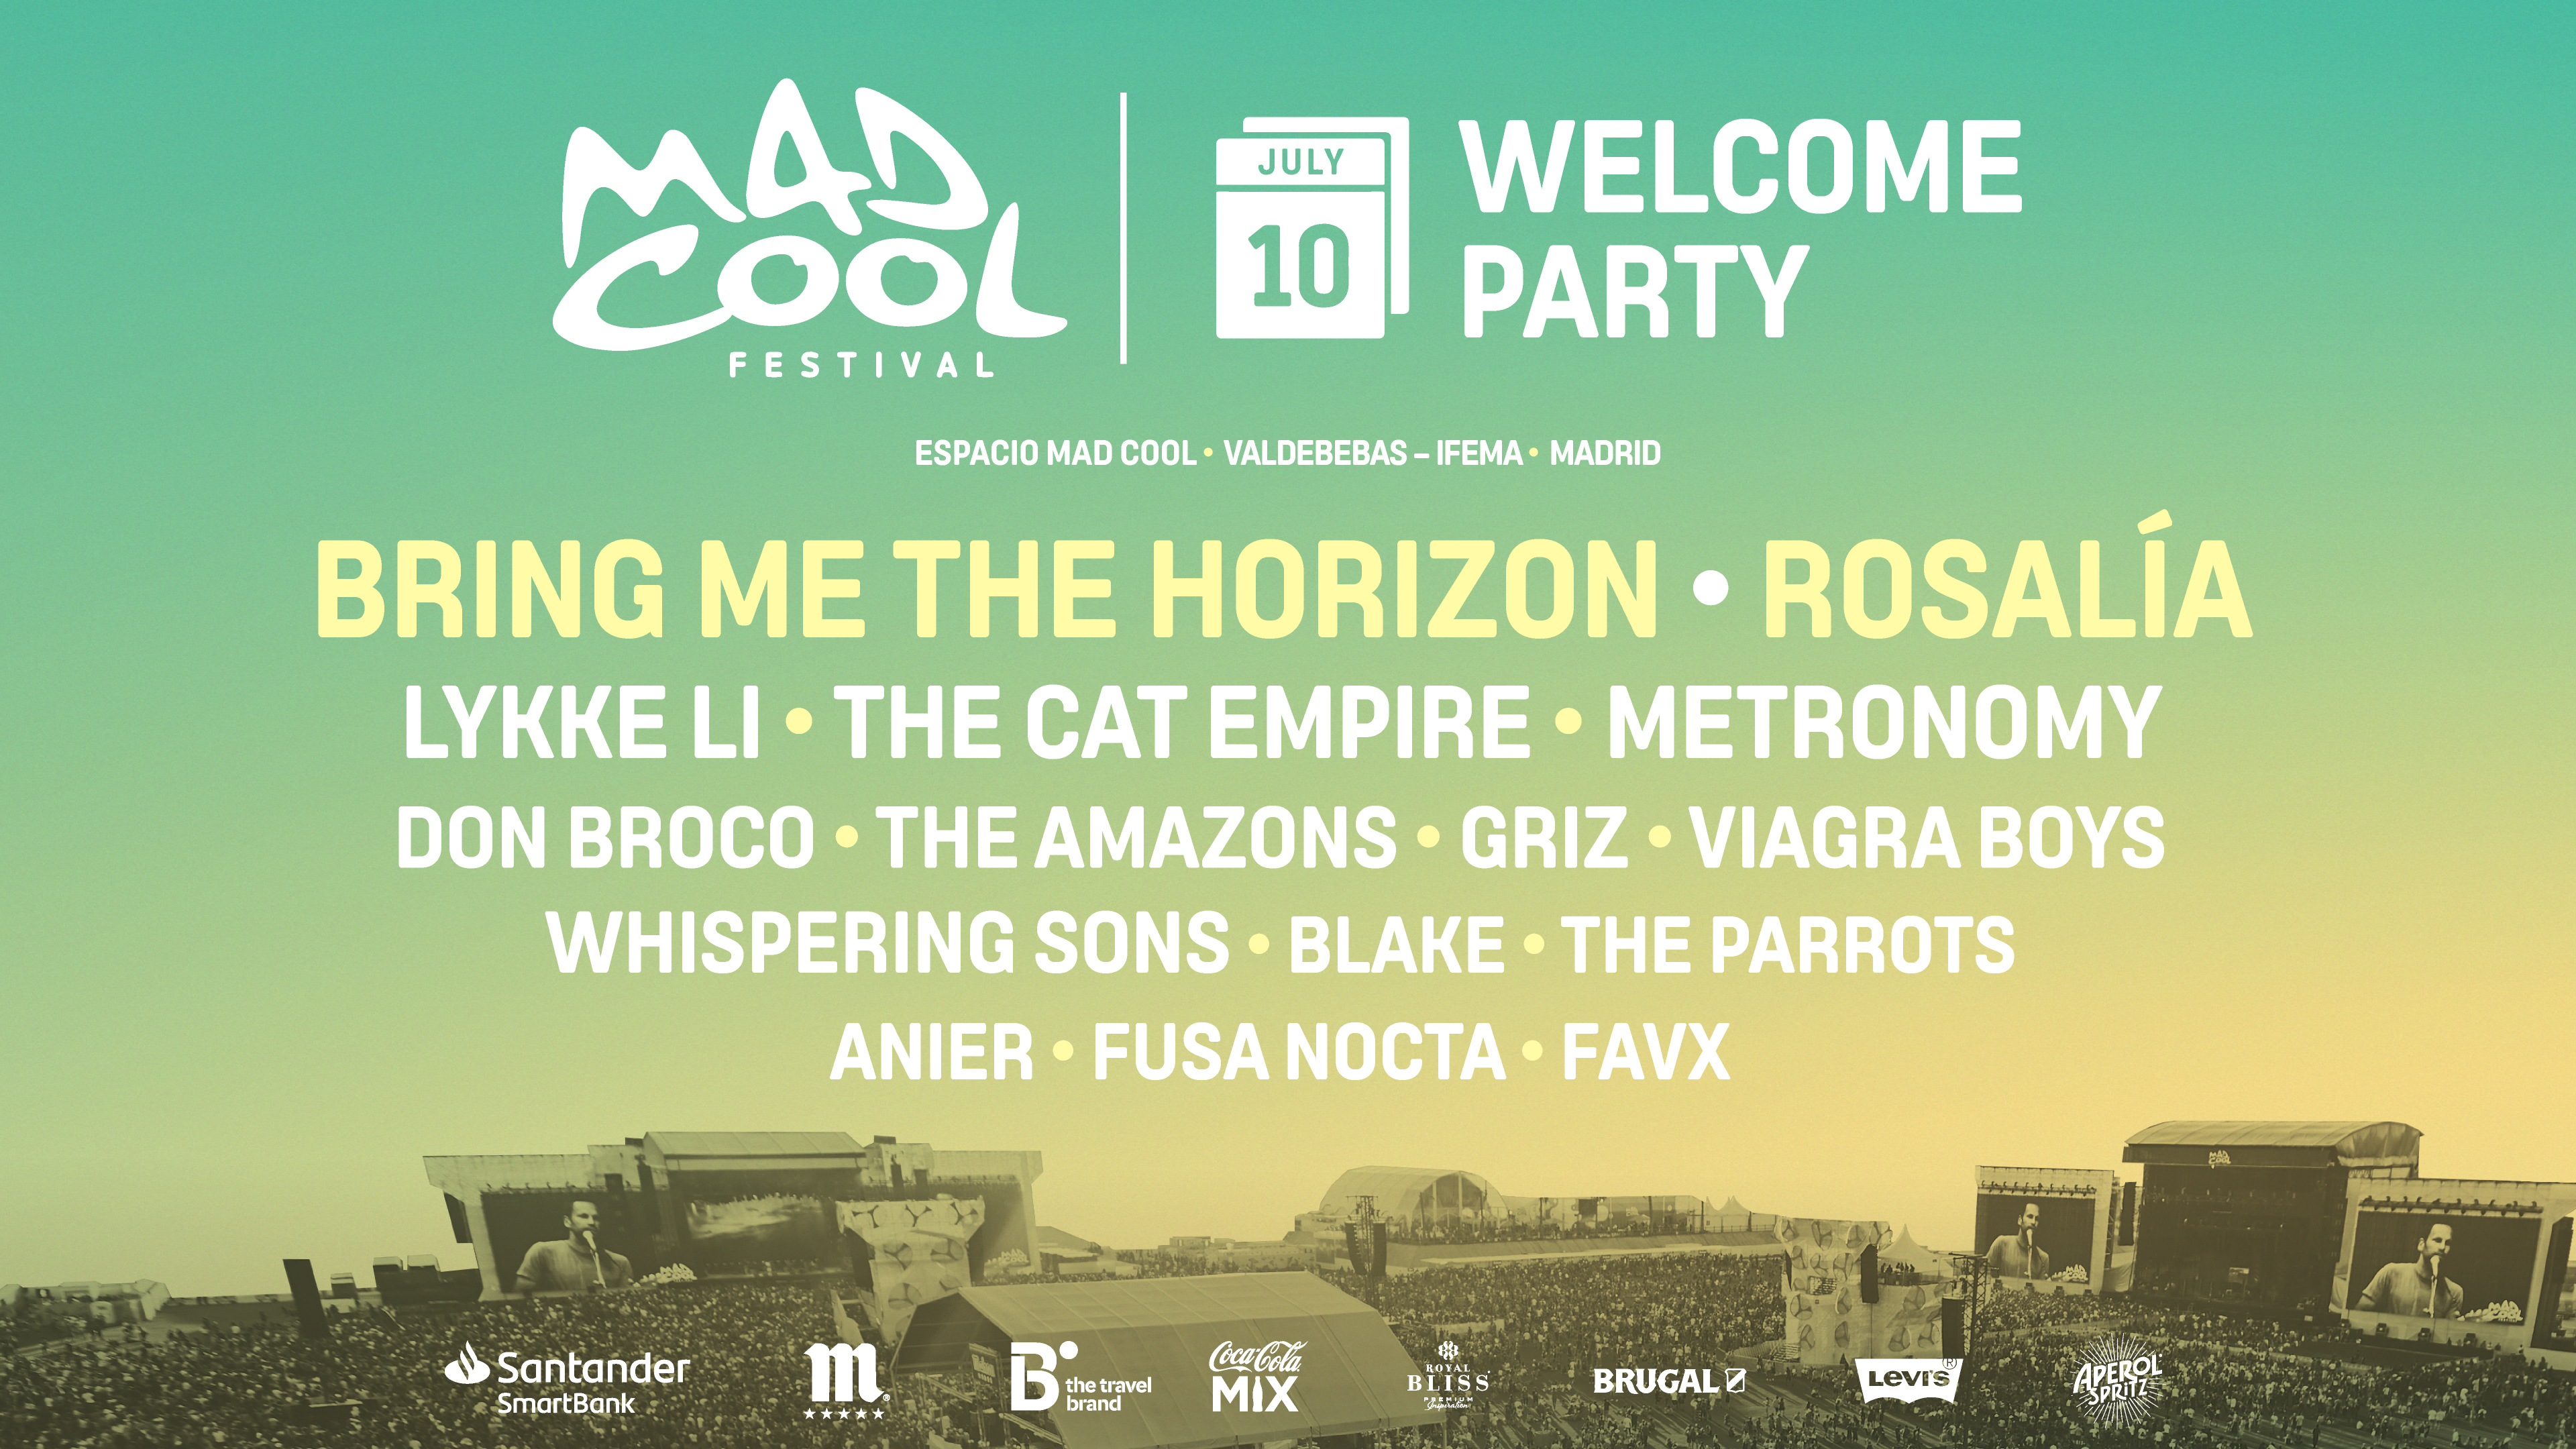 MadCool2019_welcome_party_landscape